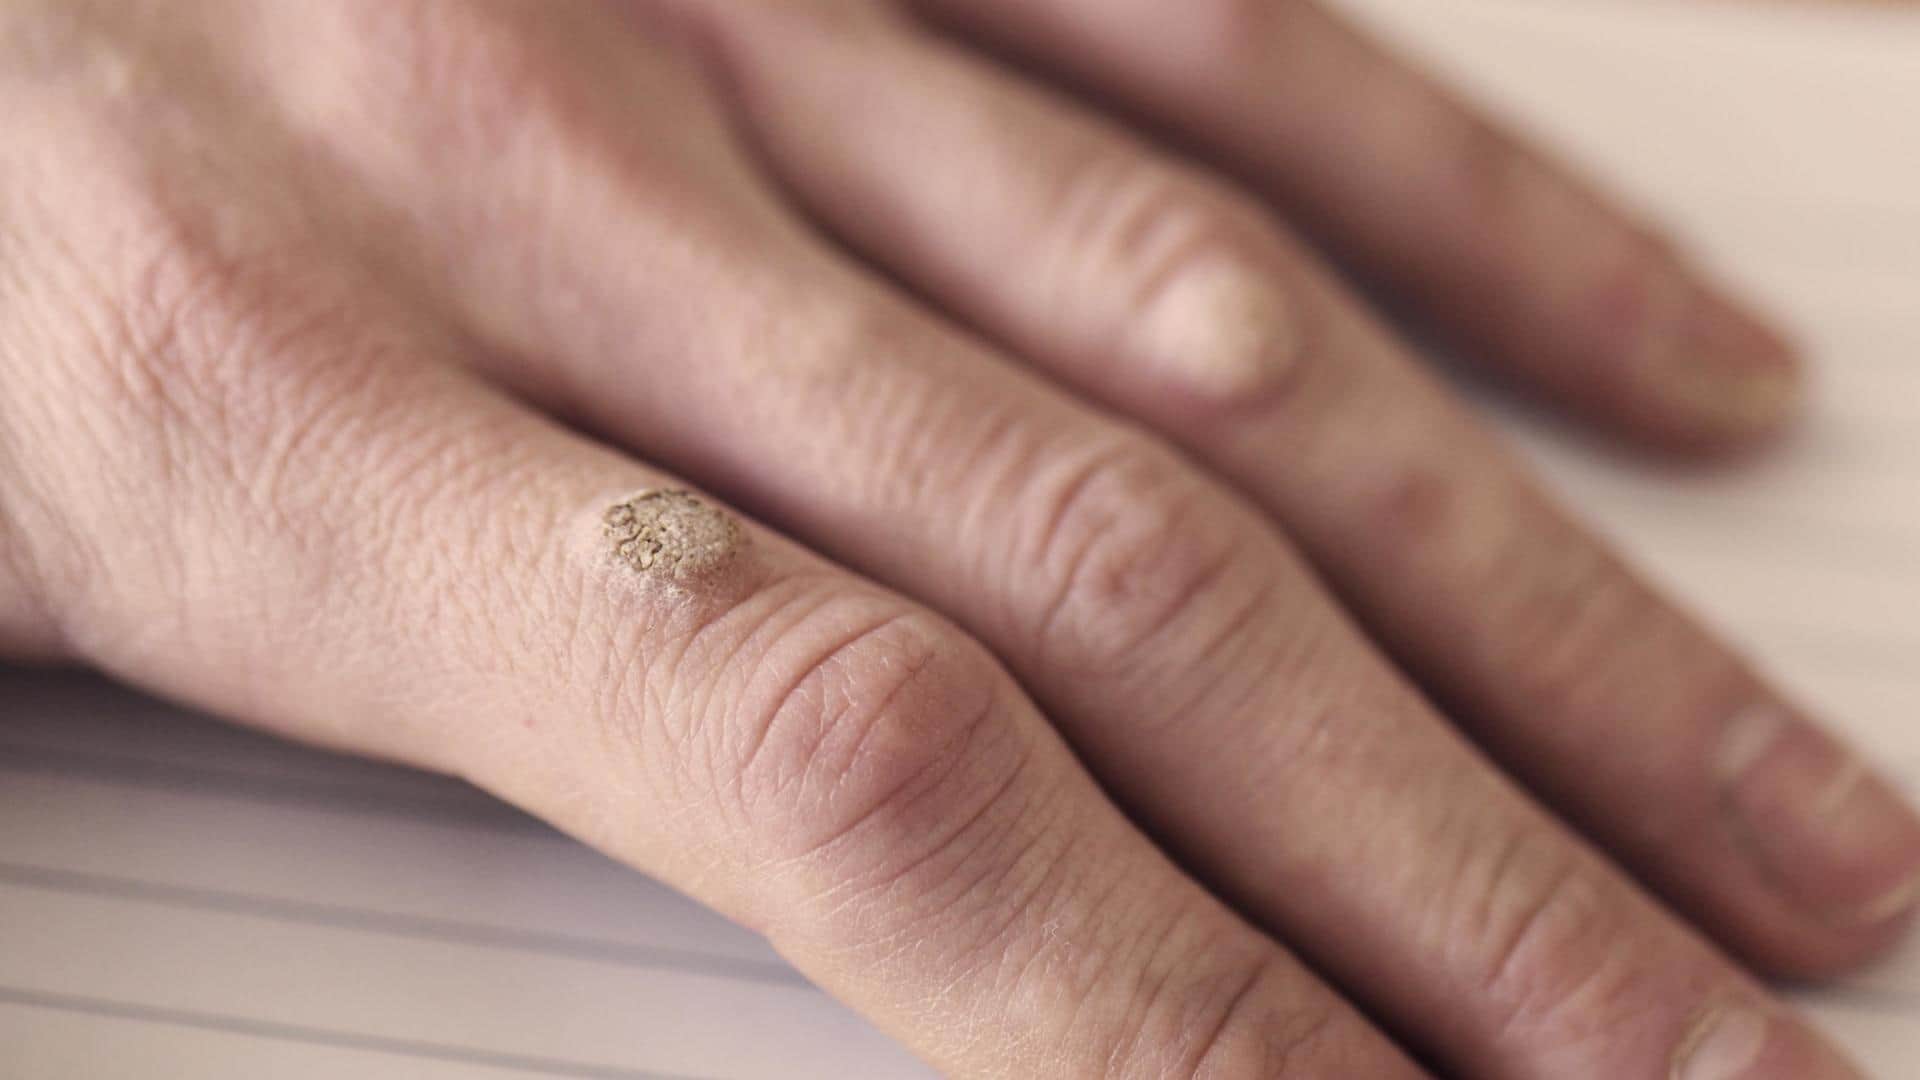 Troubled with warts? Try these home remedies for some relief